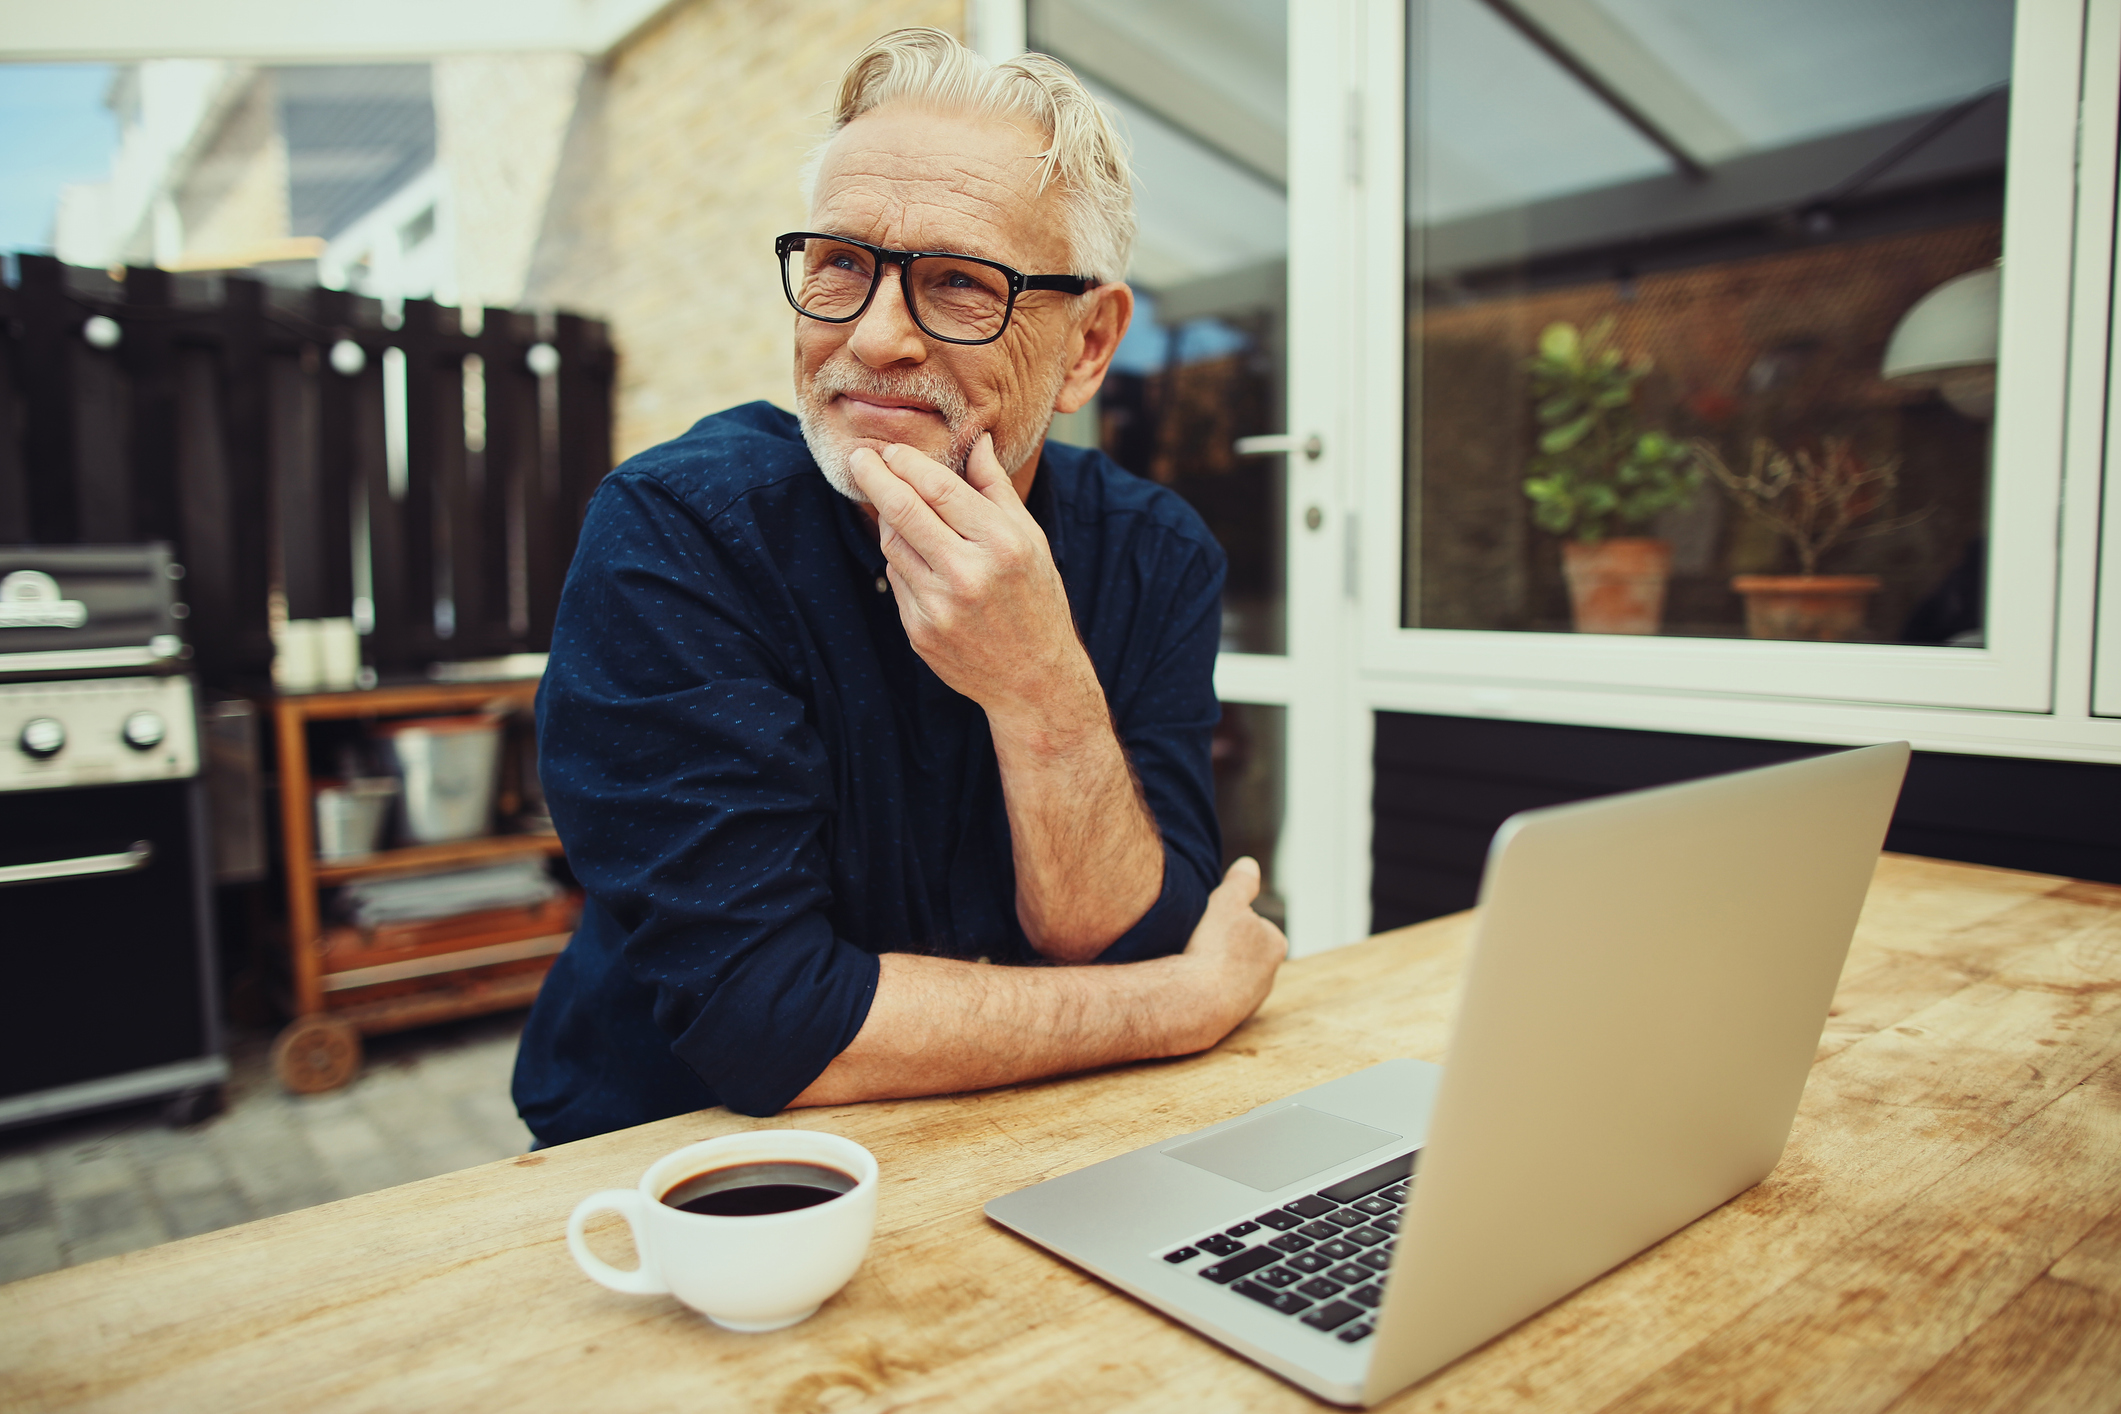 Smiling senior man sitting at a table outside on his patio working online with a laptop and drinking a cup of coffee